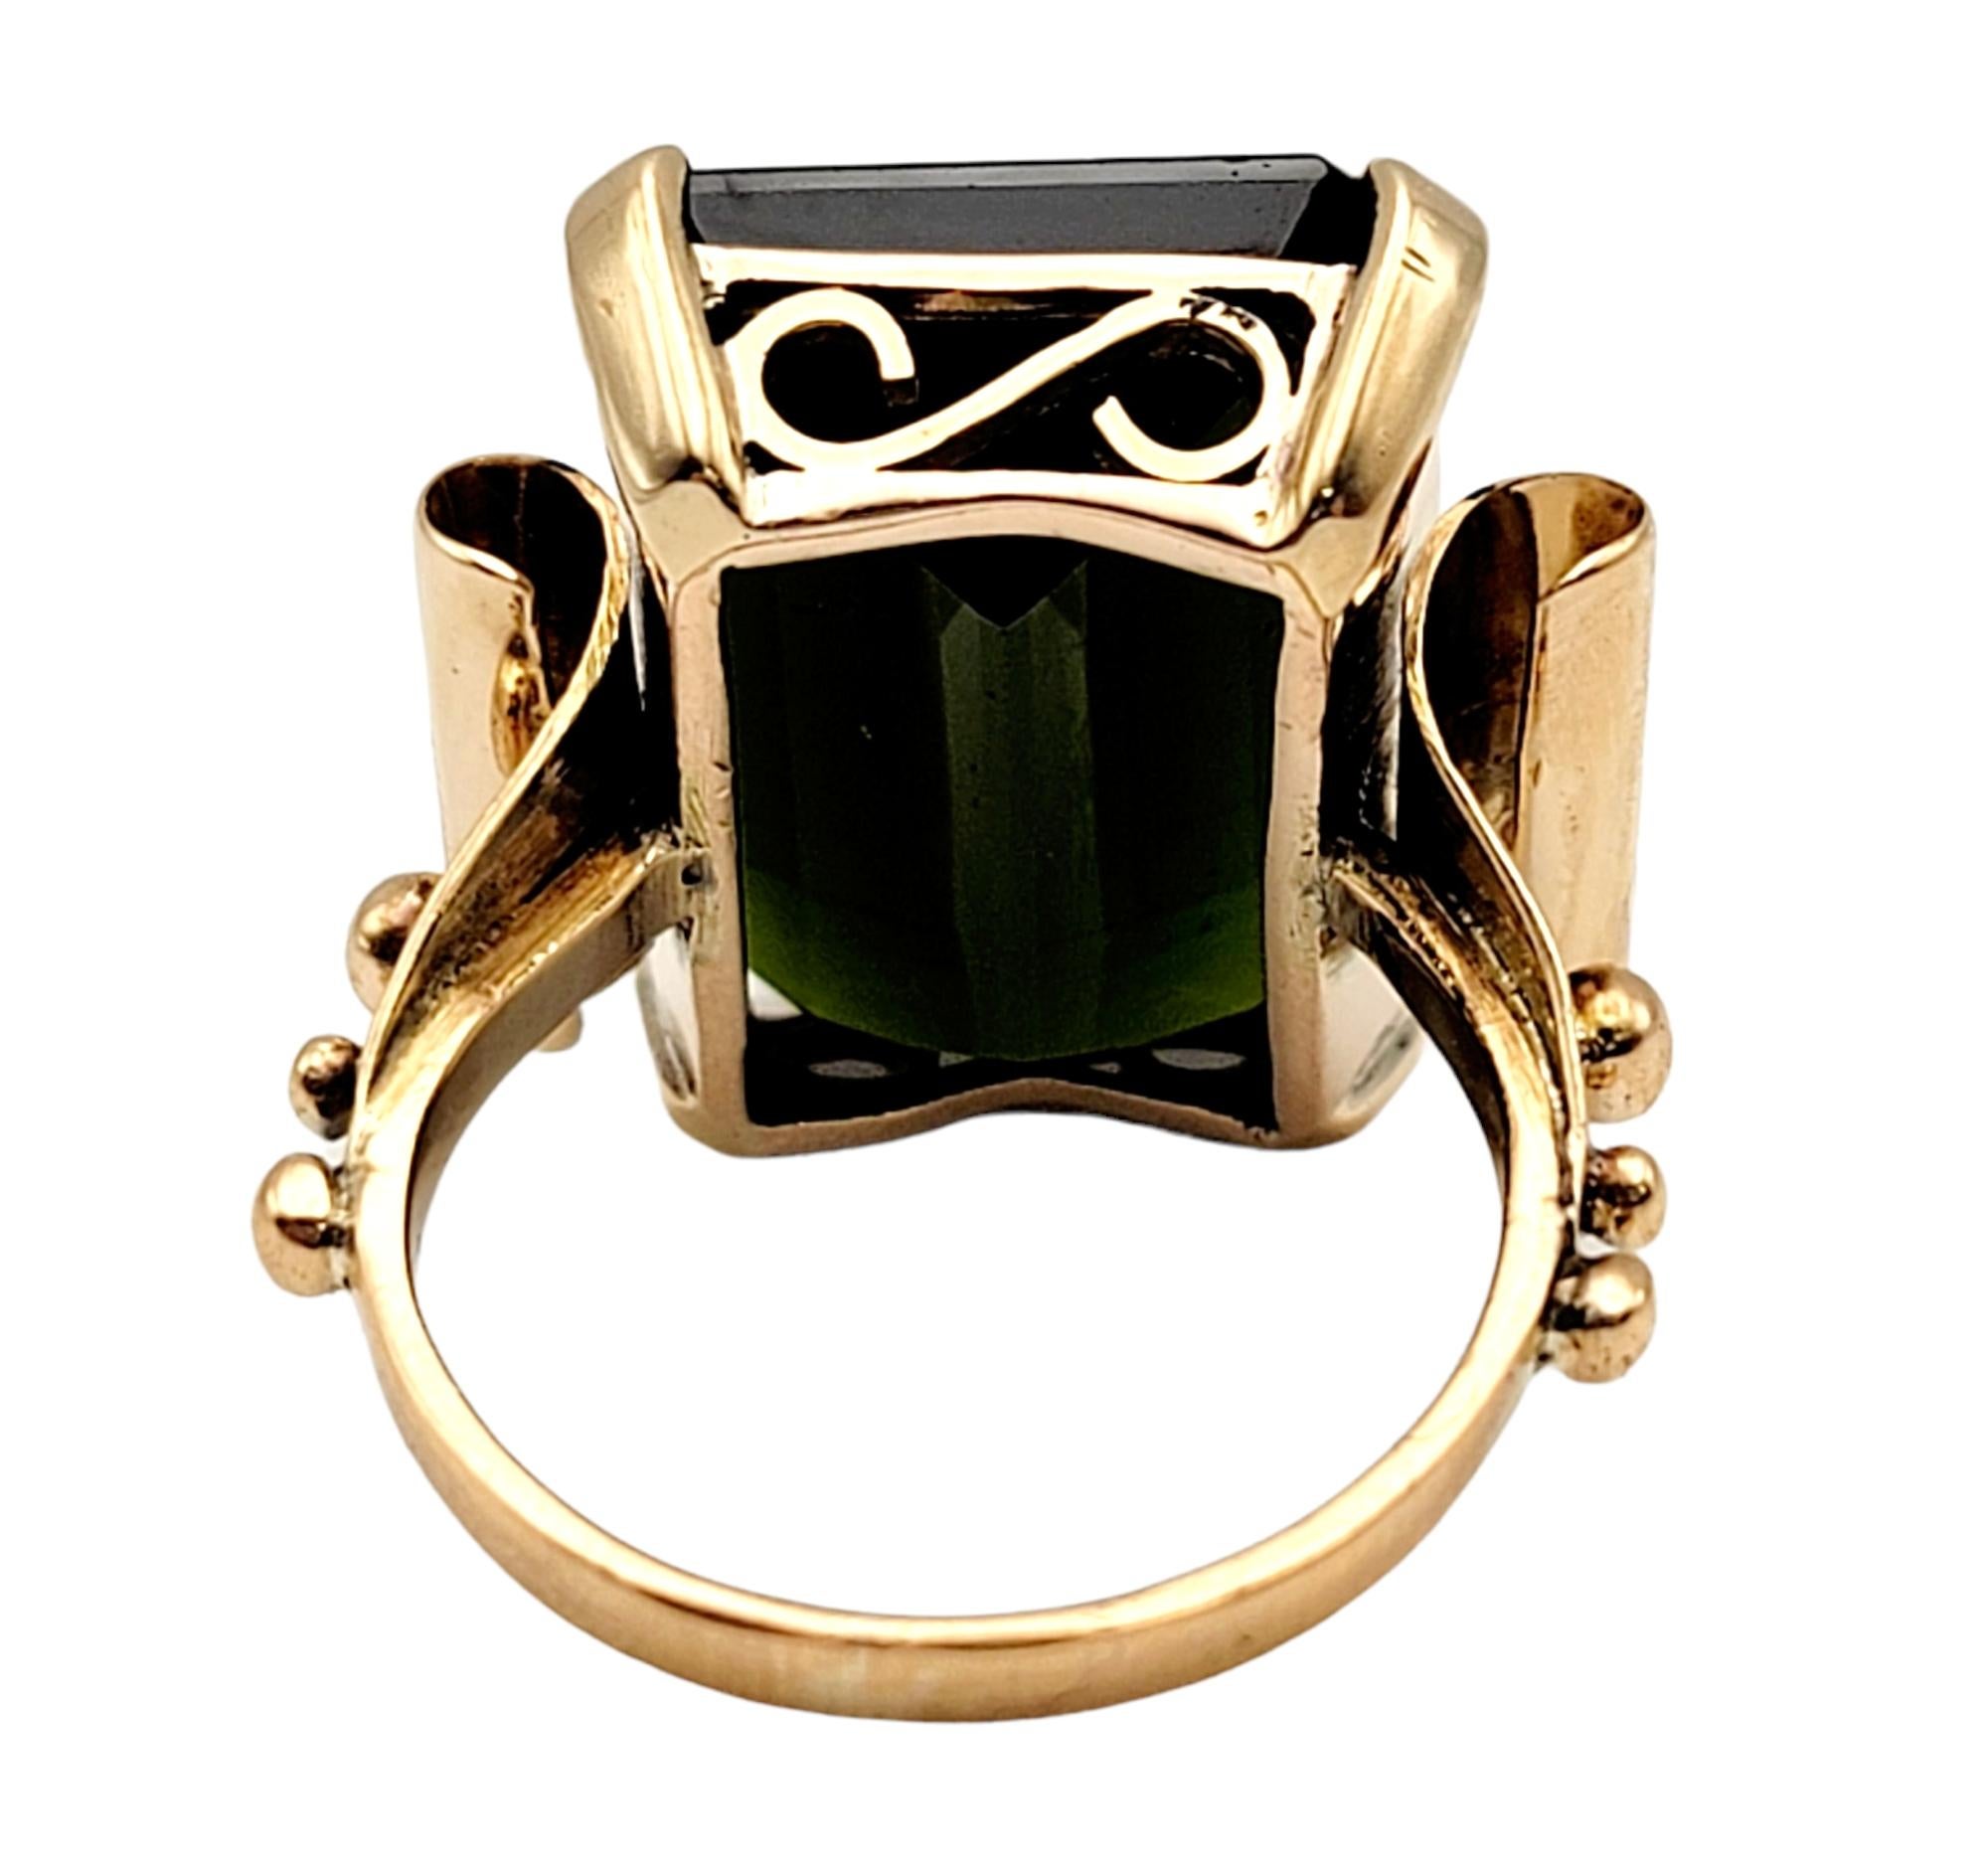 Vintage 15.58 Carat Emerald Cut Green Tourmaline Cocktail Ring in Yellow Gold For Sale 1